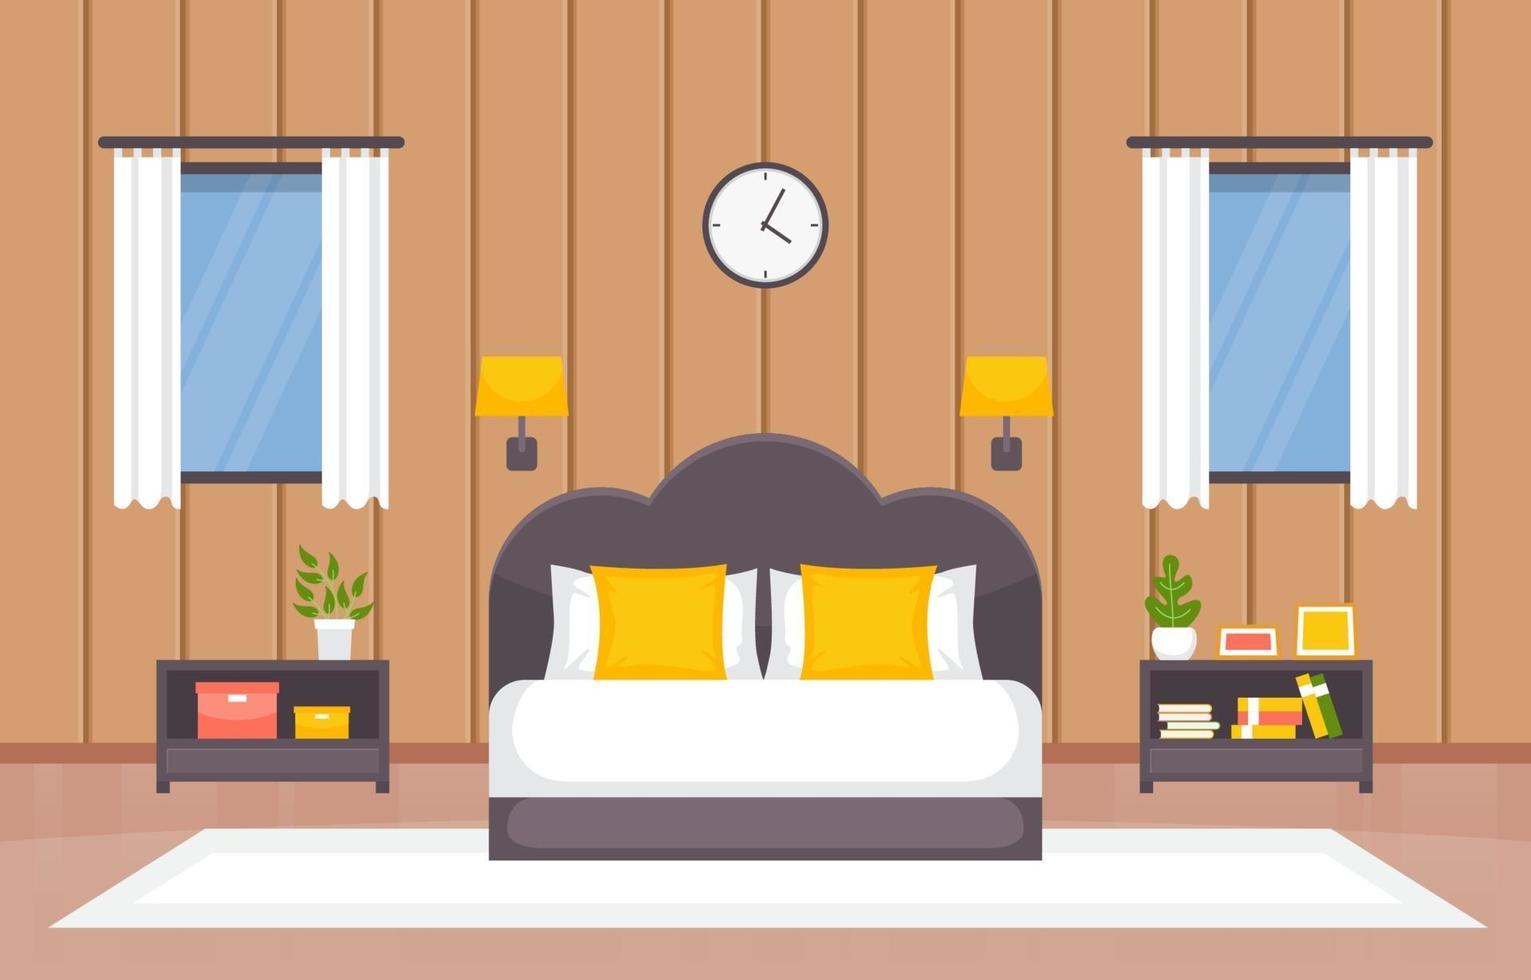 Cozy Bedroom Interior with Double Bed, Lamps and Shelves vector